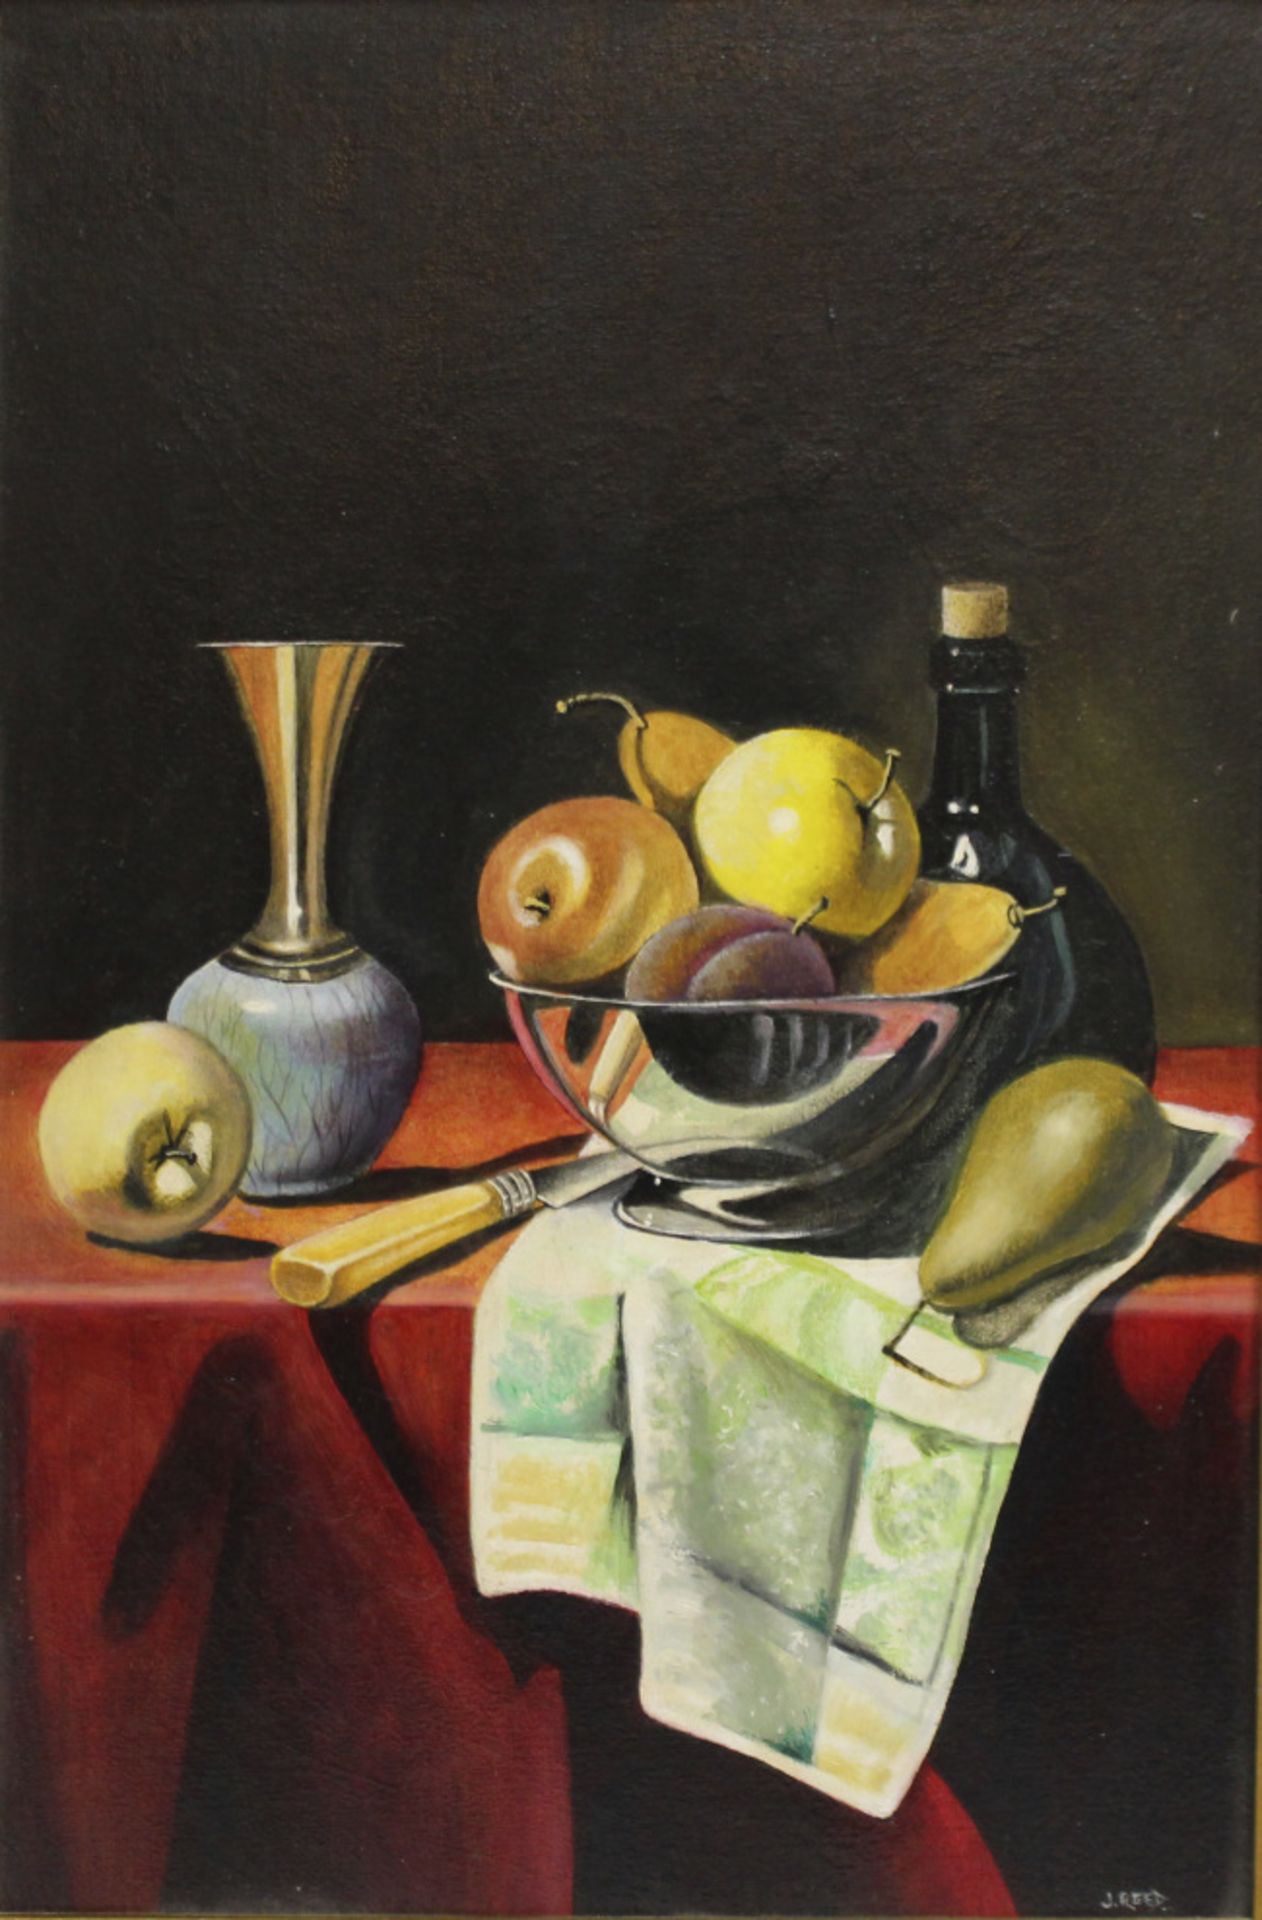 Golden Age Style Still Life by J.Reed Oil on Board - Image 2 of 3